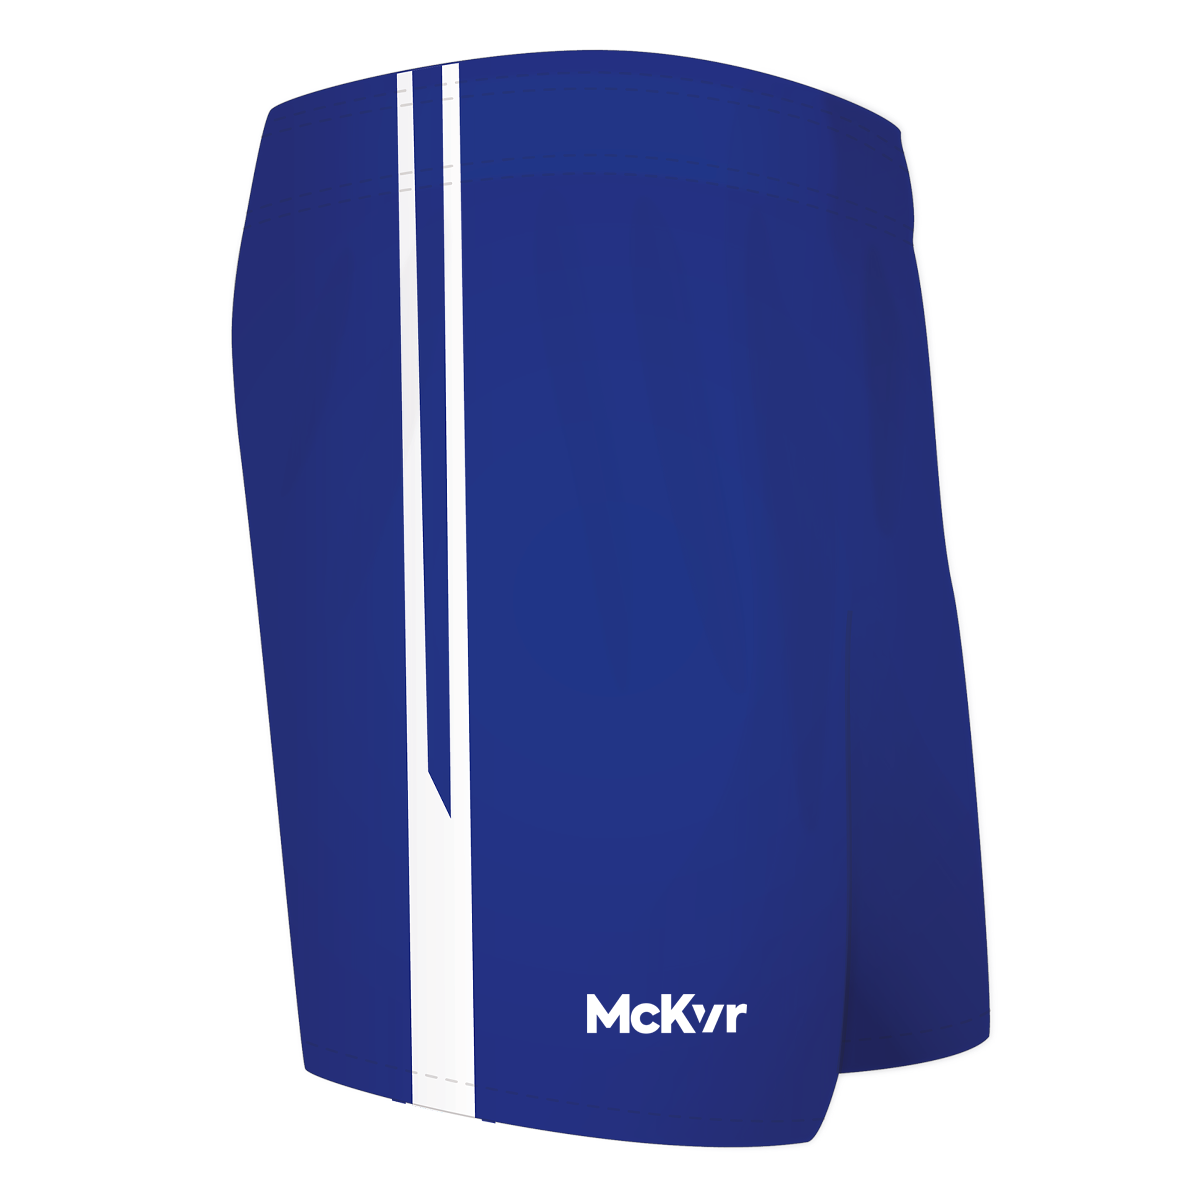 Mc Keever Breaffy GAA Official Training Shorts - Adult - Royal/White